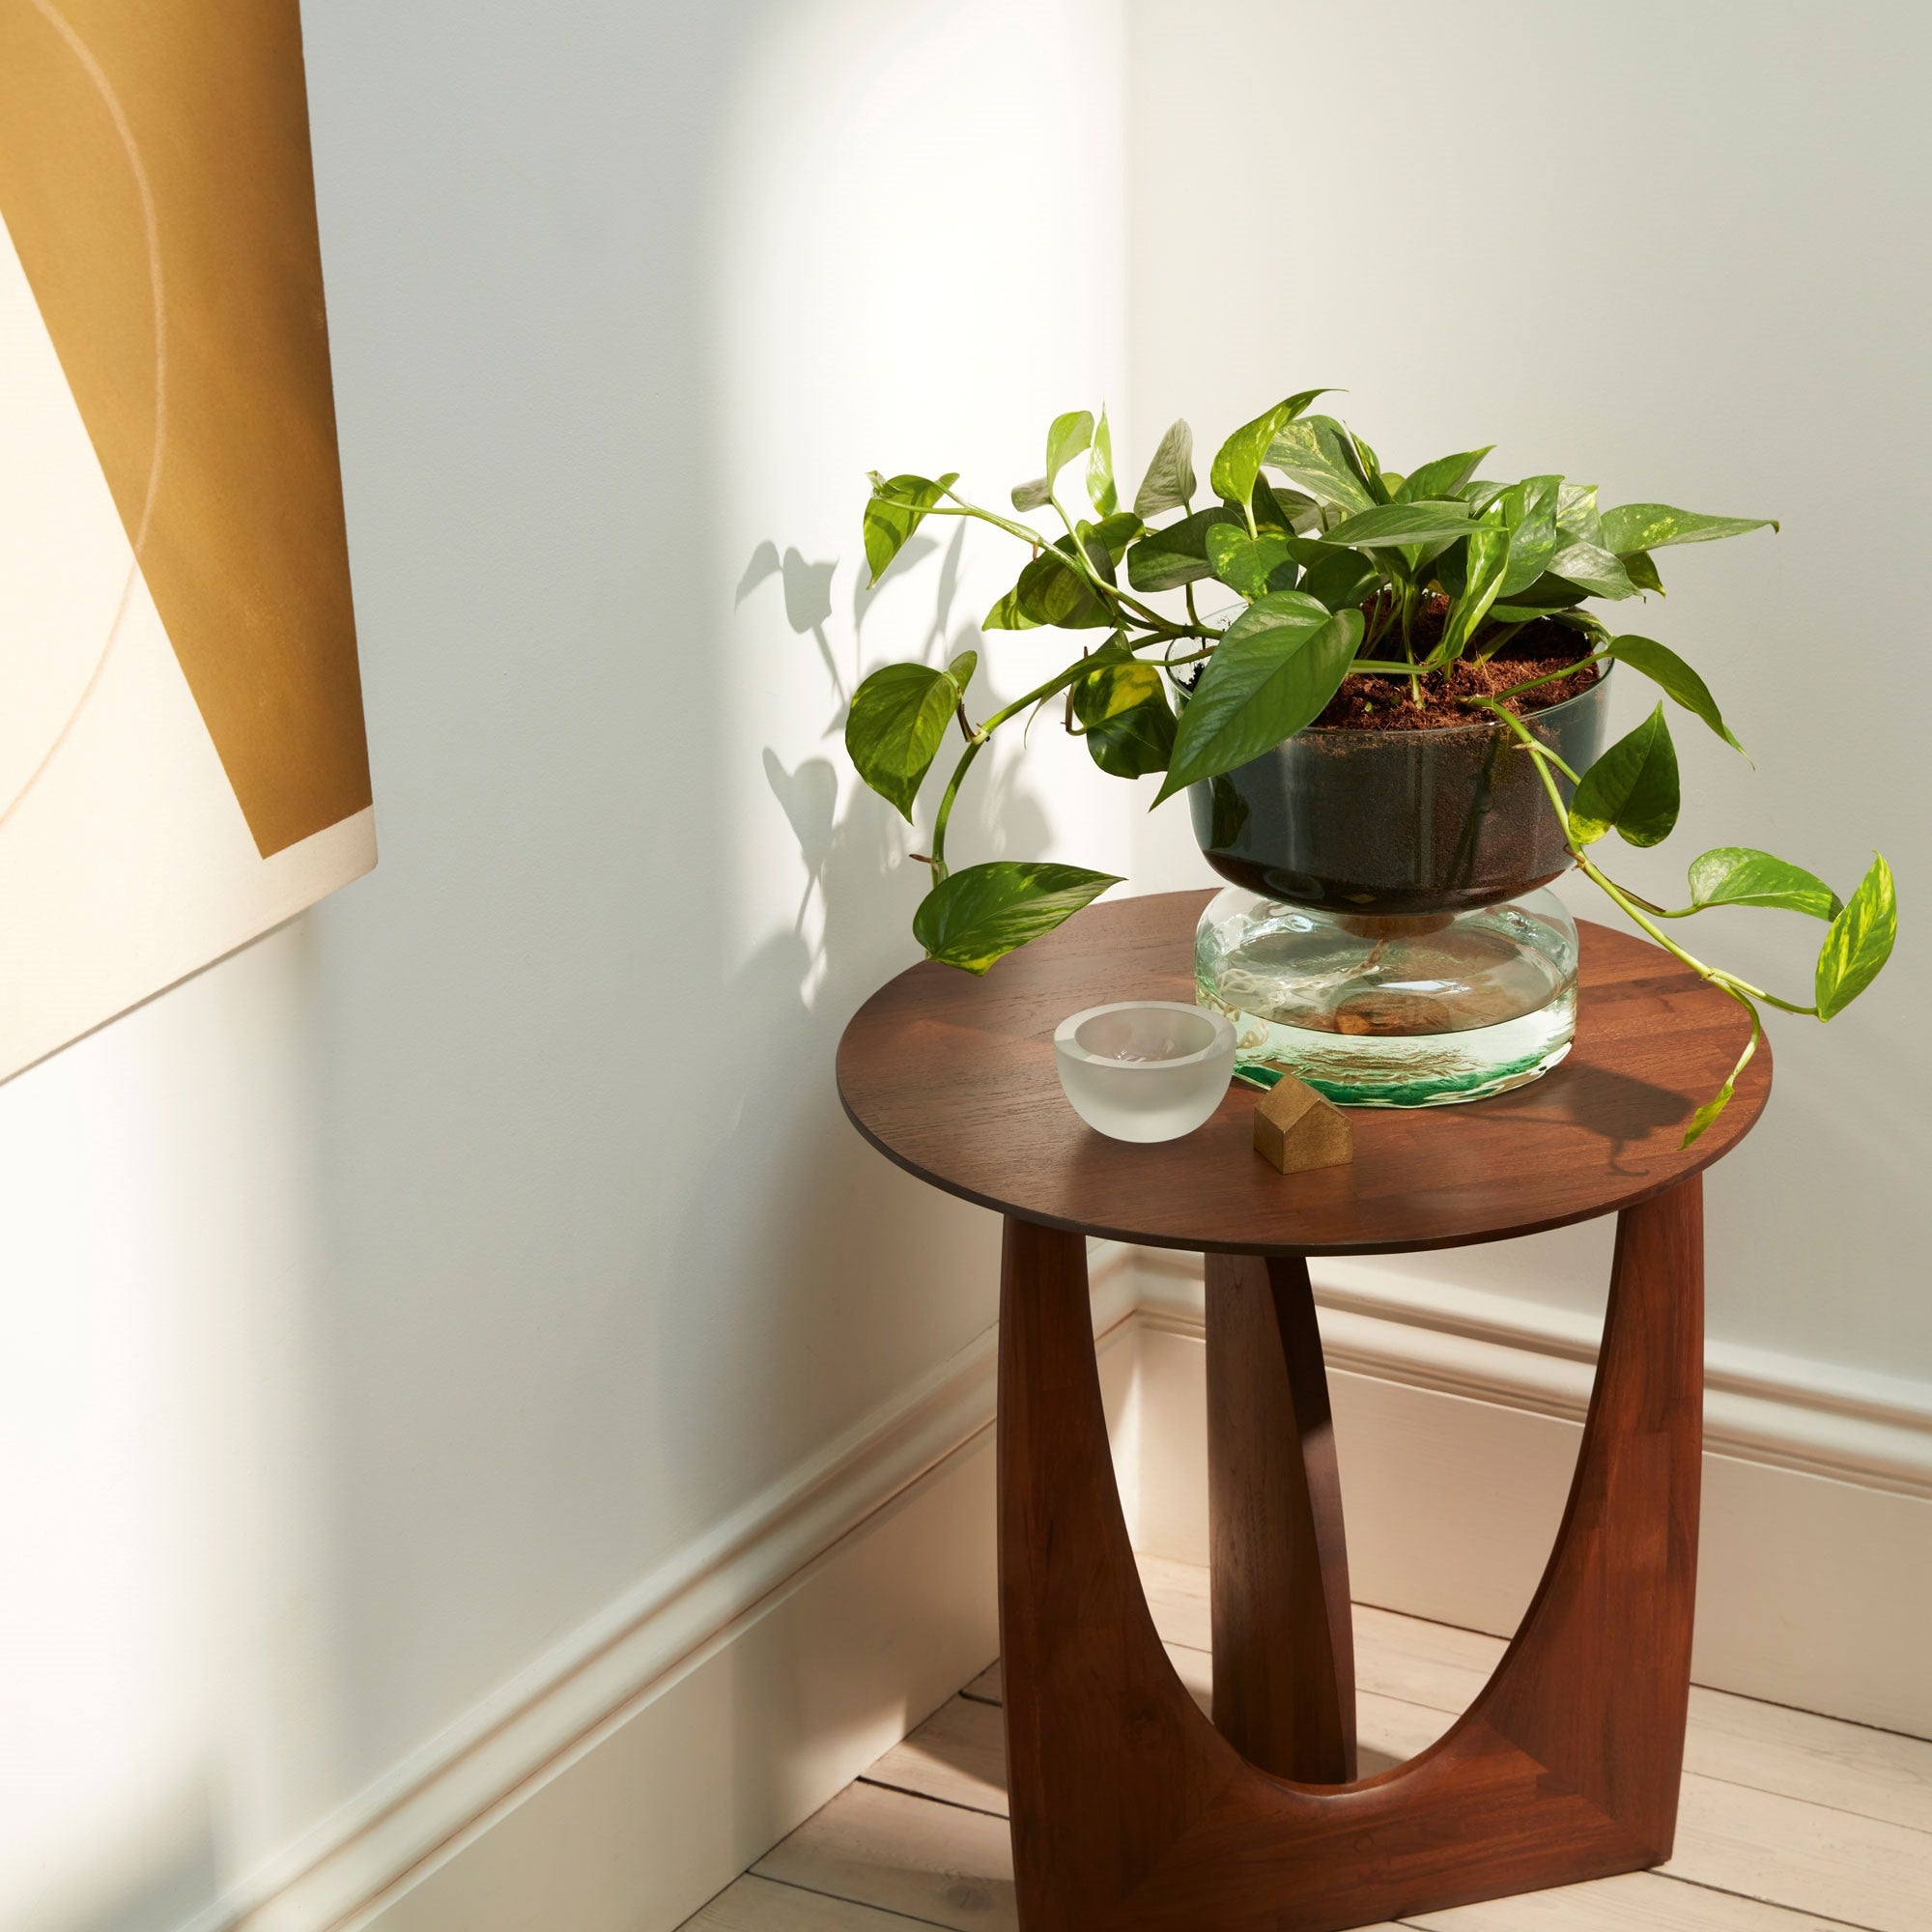 LSA’s self-watering planter range is being showcased at the London Design Festival